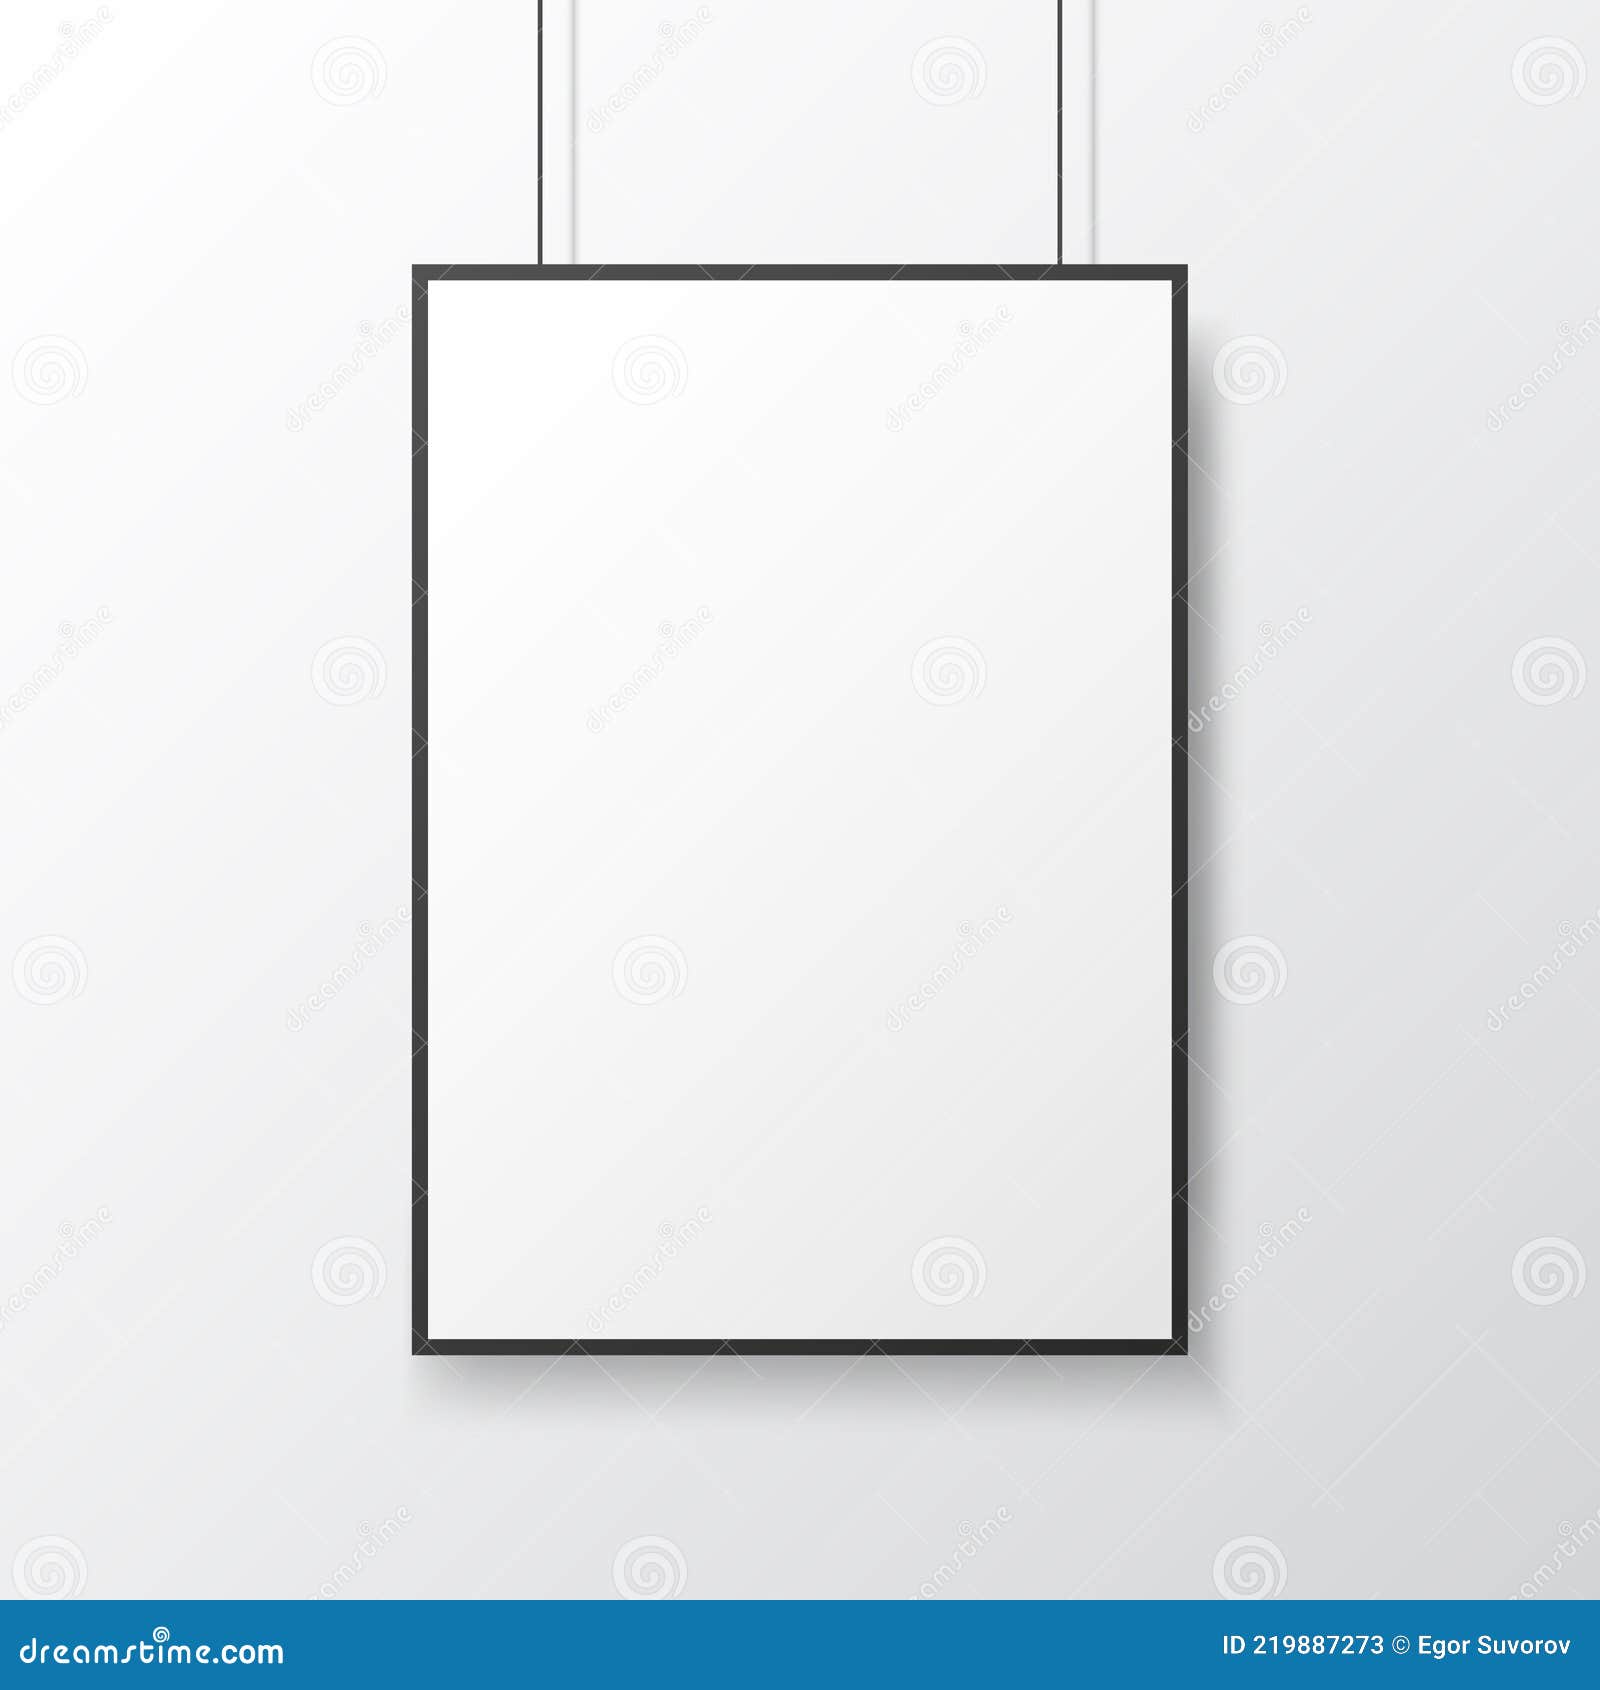 Closed Sign Hanging Isolated On White Wall Stock Illustration